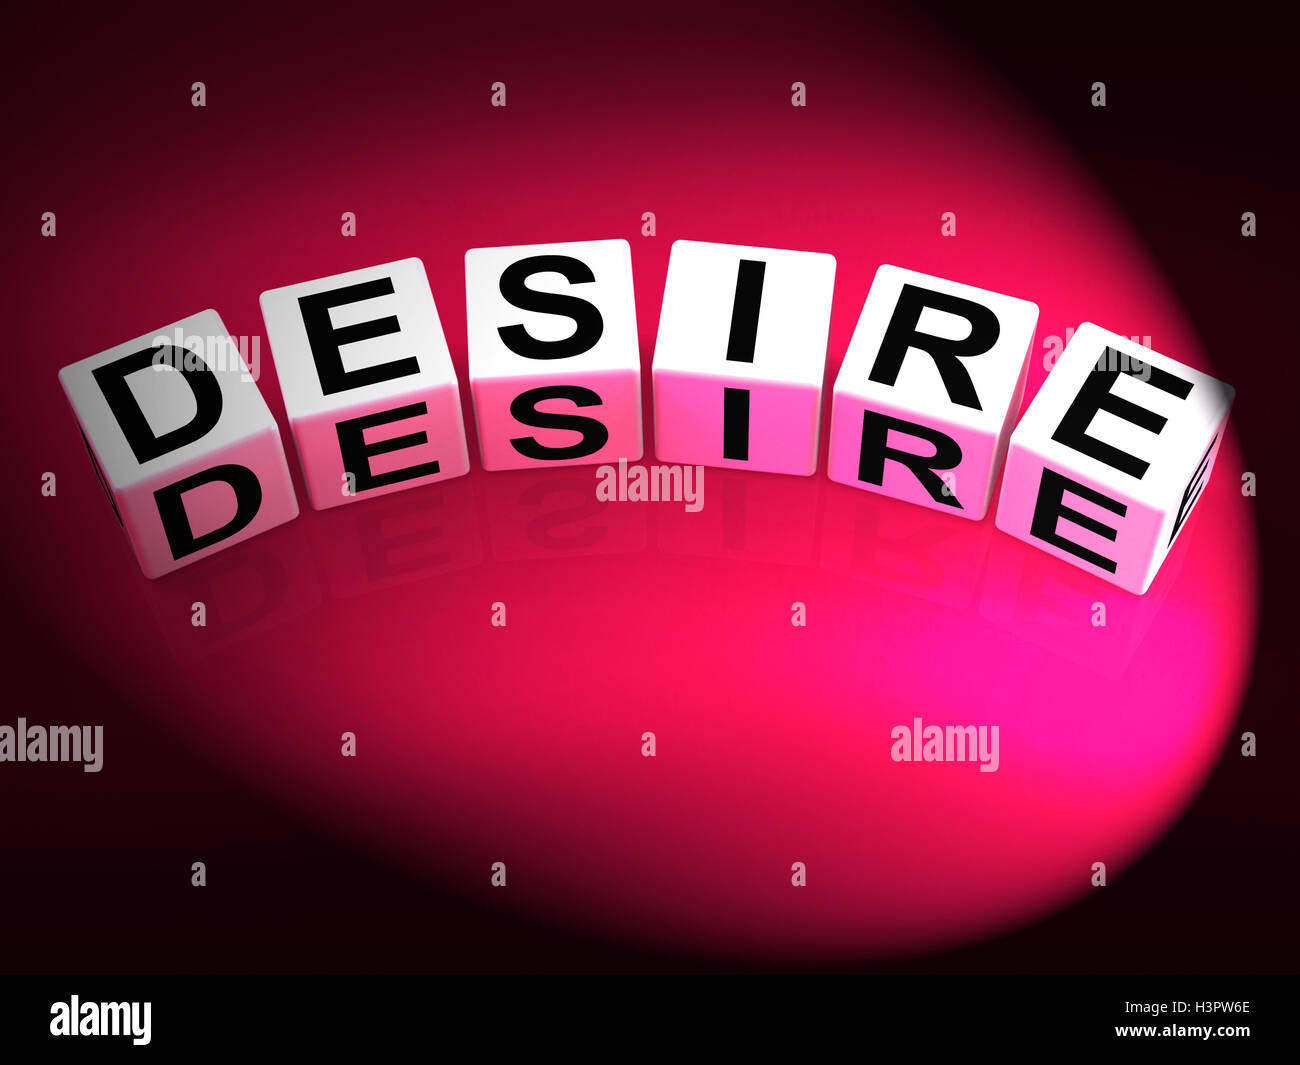 Desire Dice Show Desires Ambitions and Motivation Stock Photo